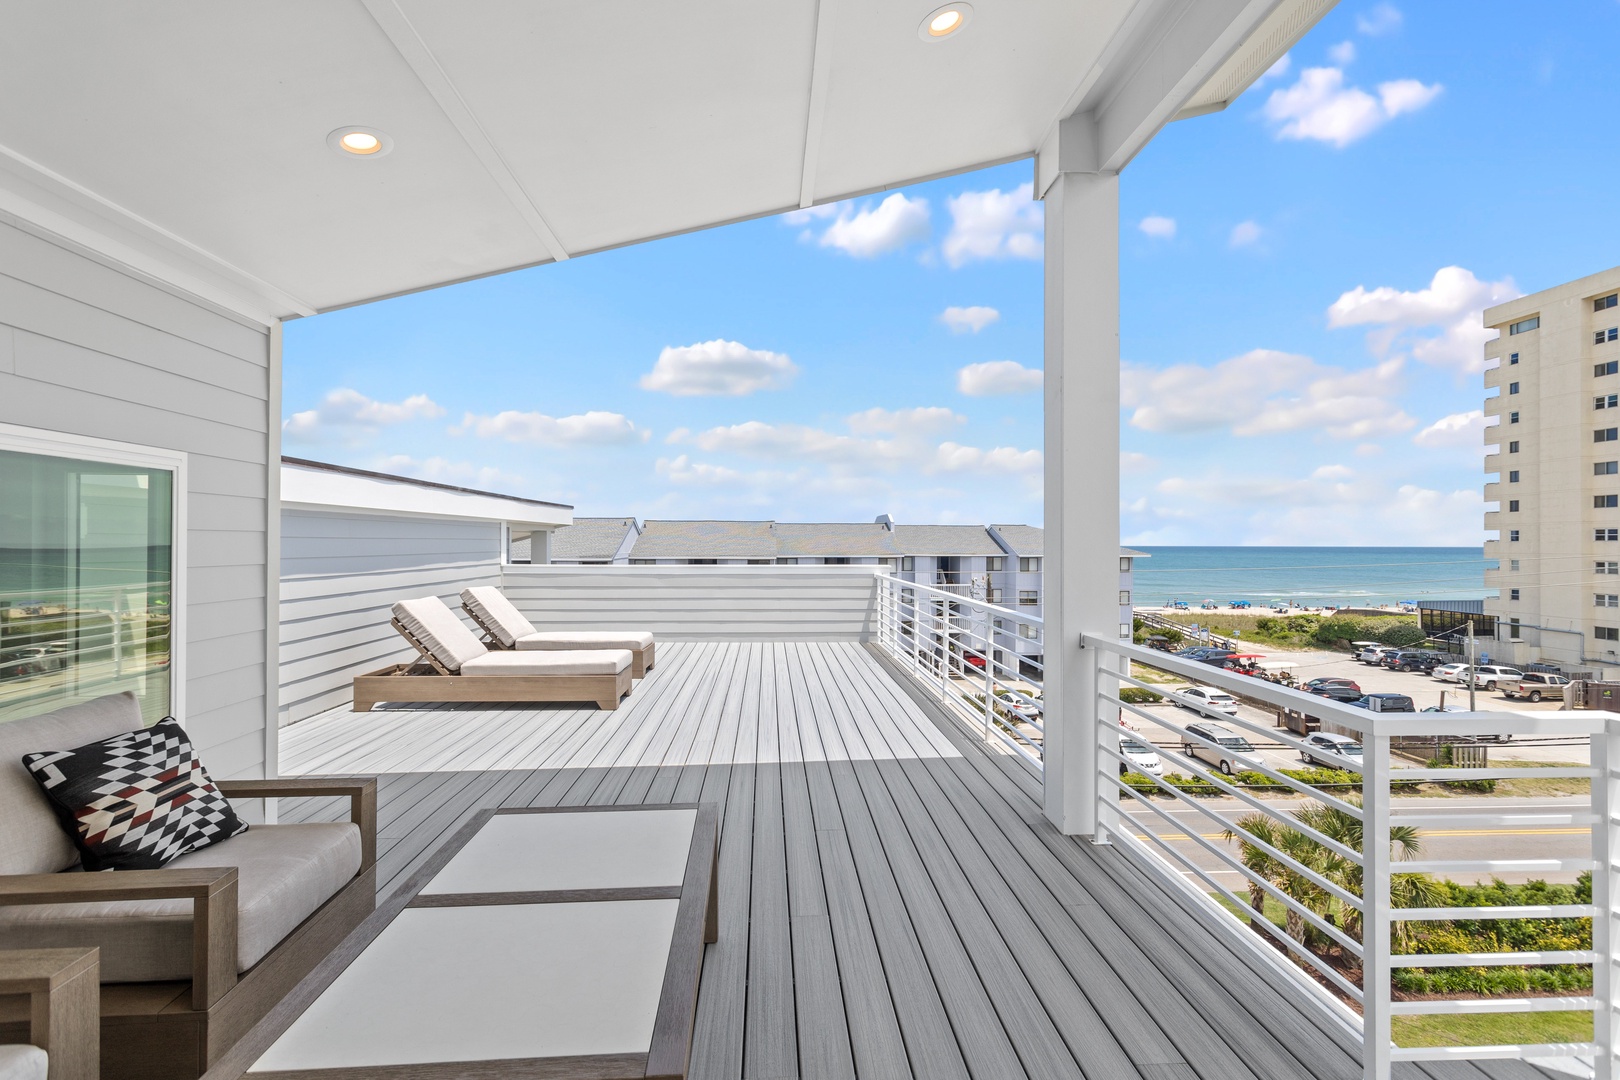 The top-floor partially covered deck with expansive ocean views